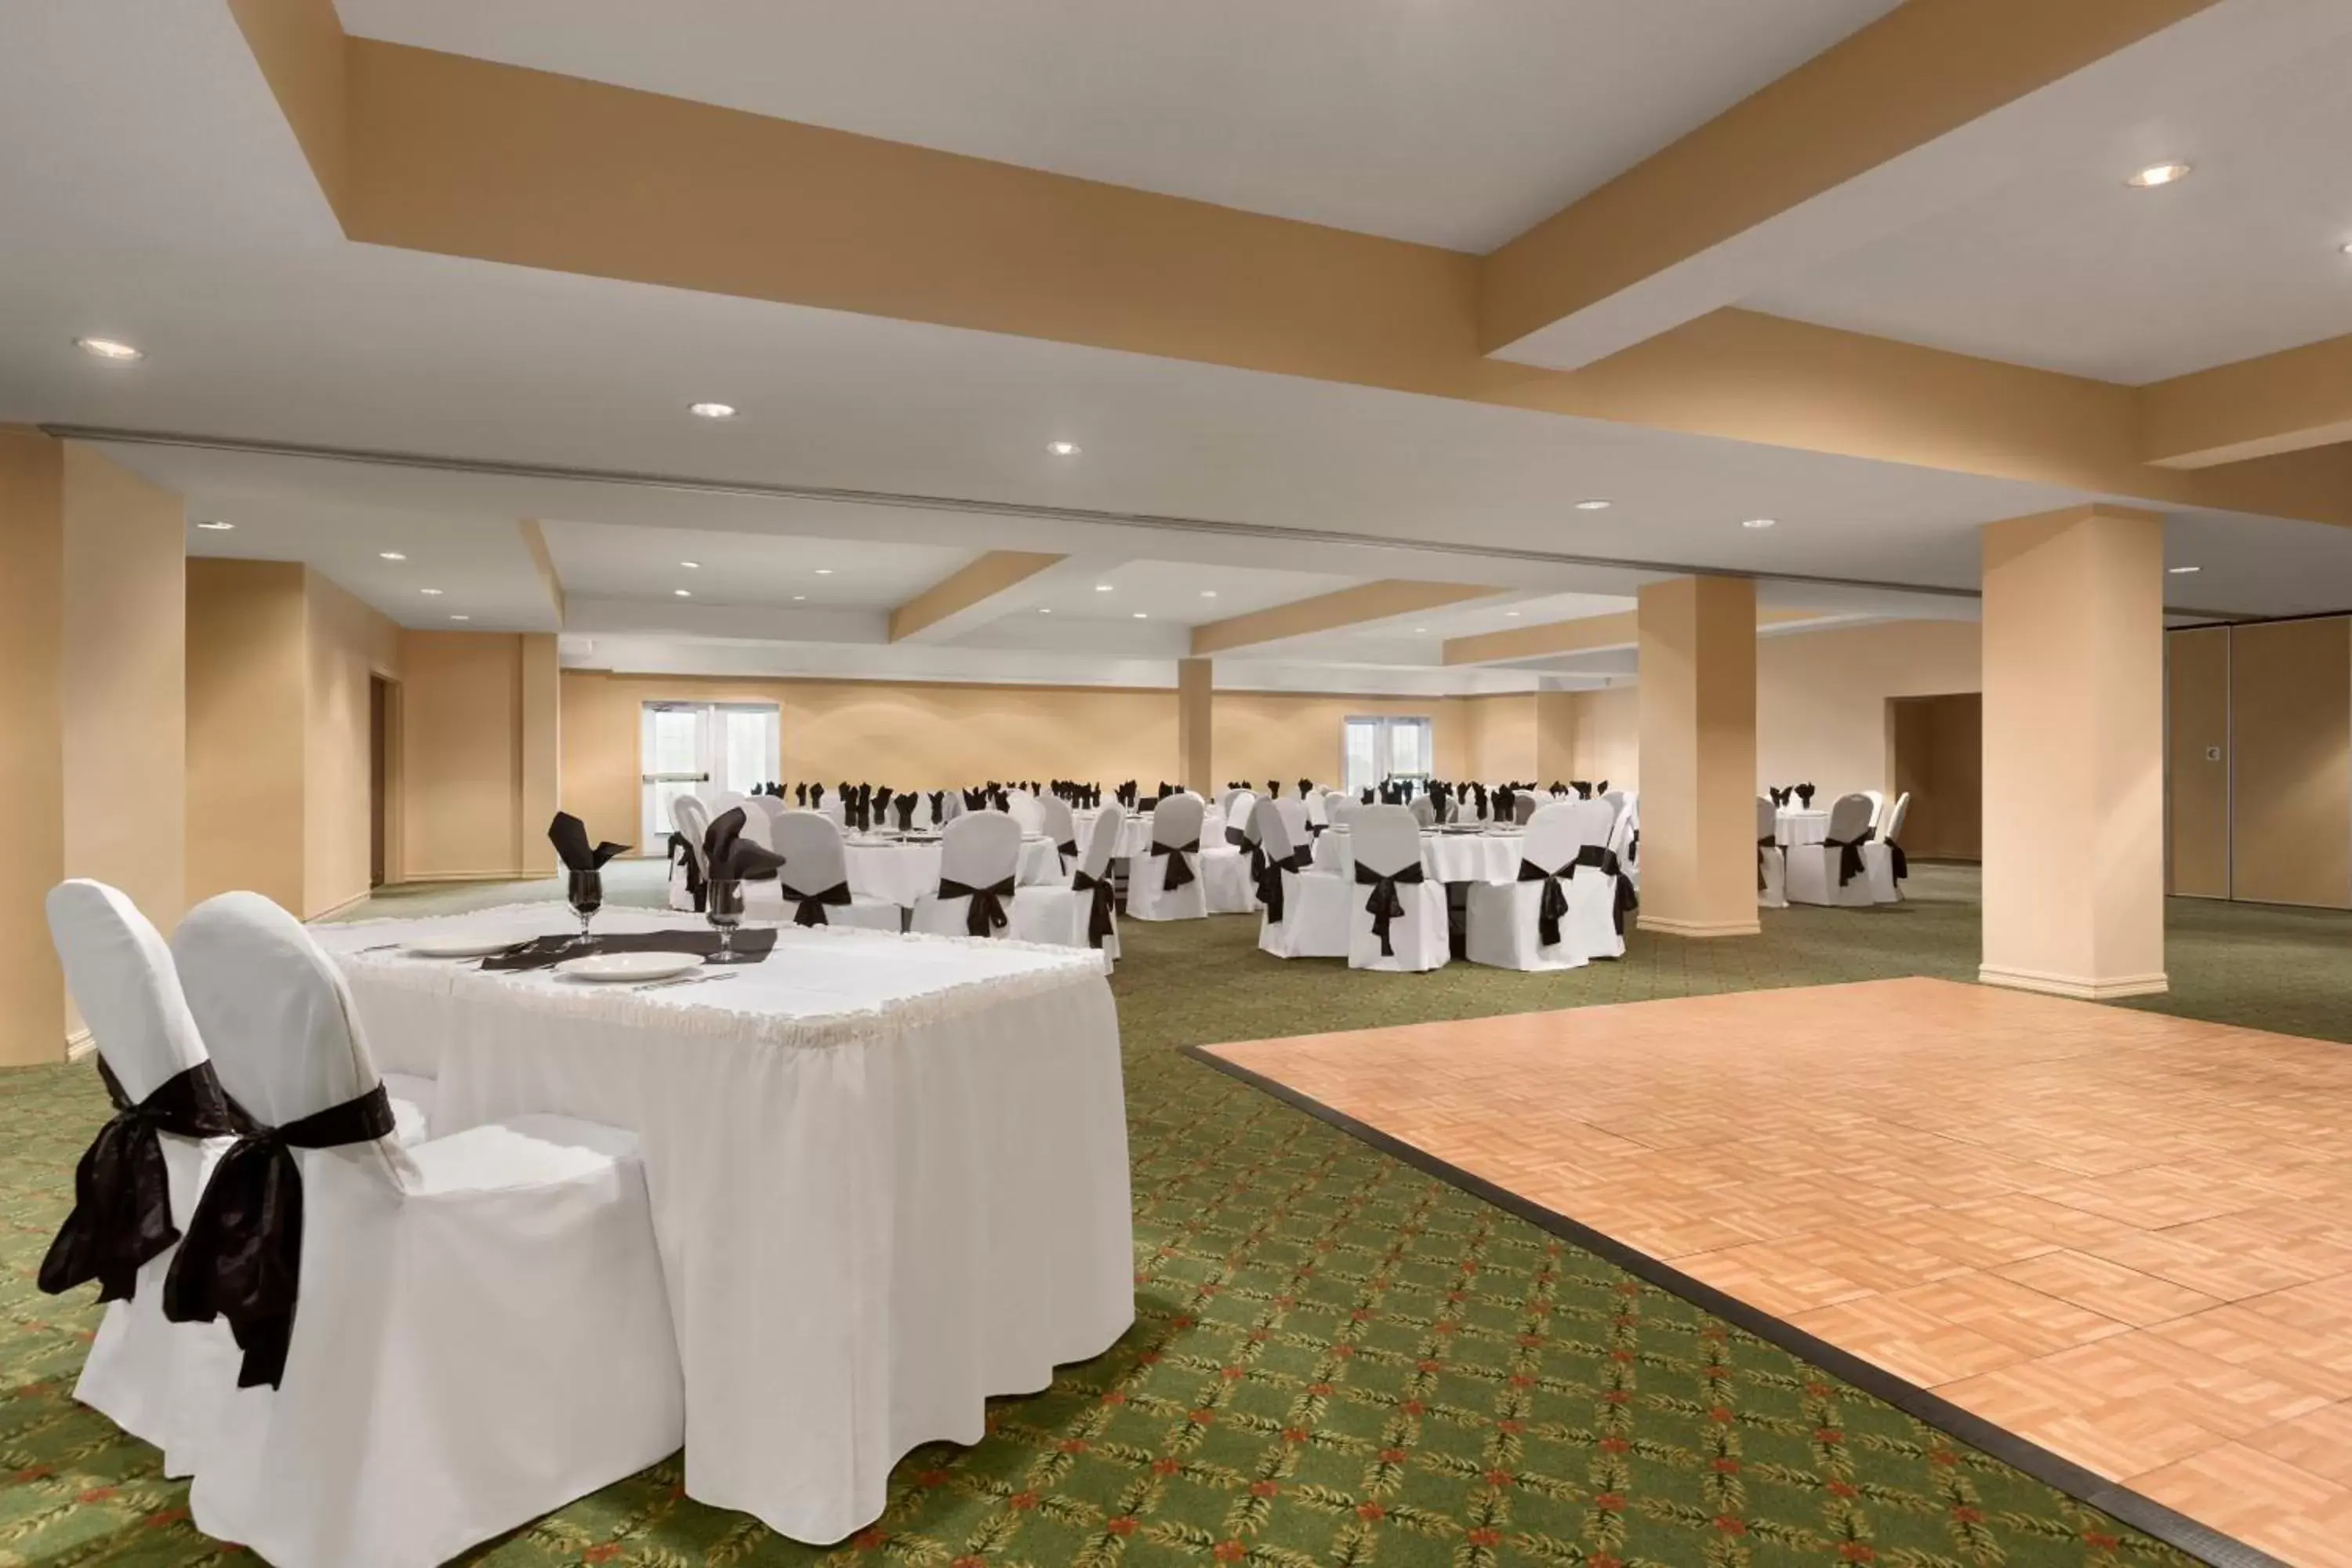 Banquet/Function facilities, Banquet Facilities in Days Inn by Wyndham Oromocto Conference Centre